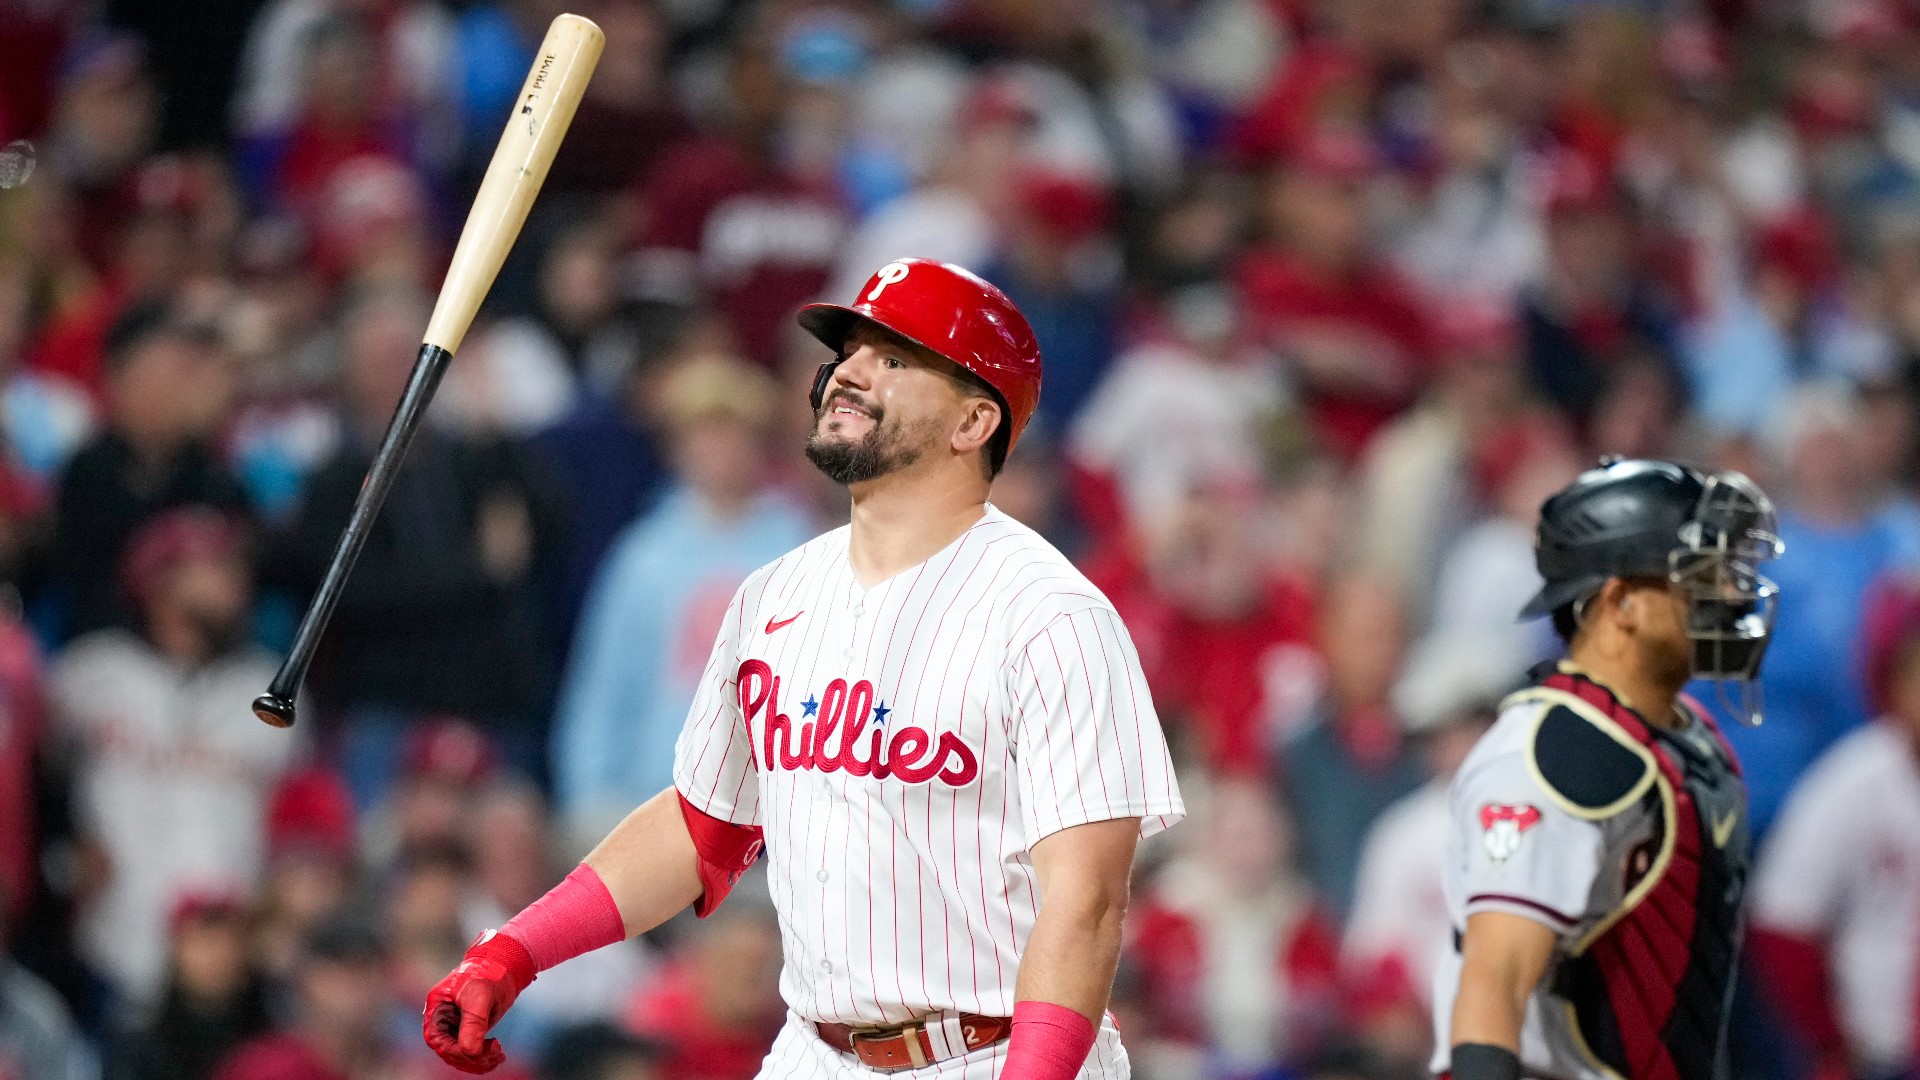 Phillies Nation excited for this season after home opener win